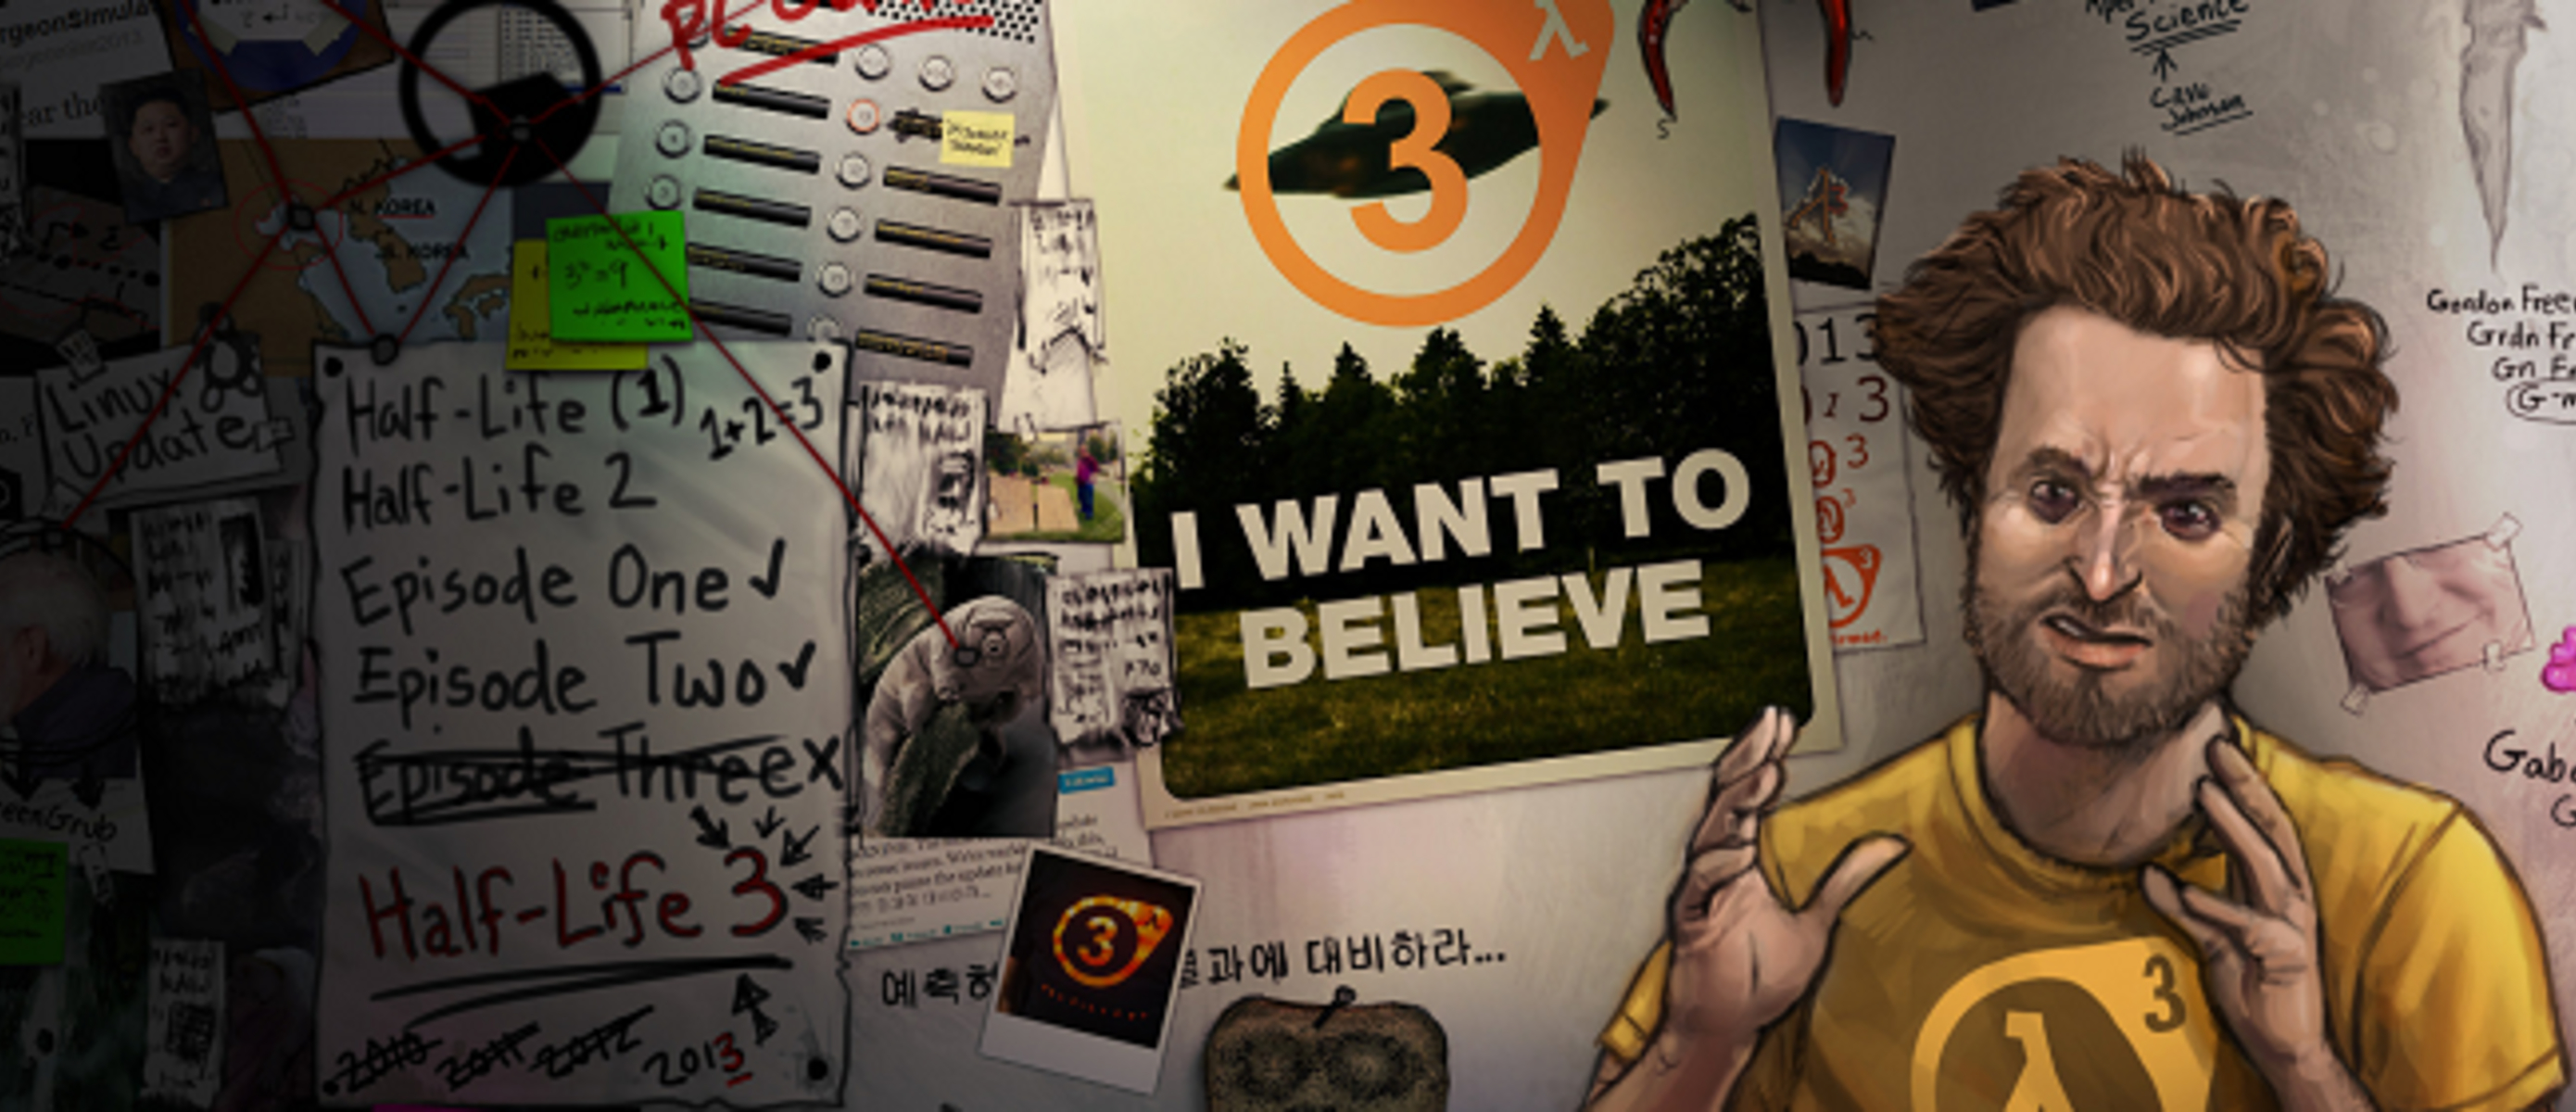 Want to life just. I want to believe half Life 3. Half Life 3? Half Life 1.5. Half Life 3 confirmed. Valve игры.